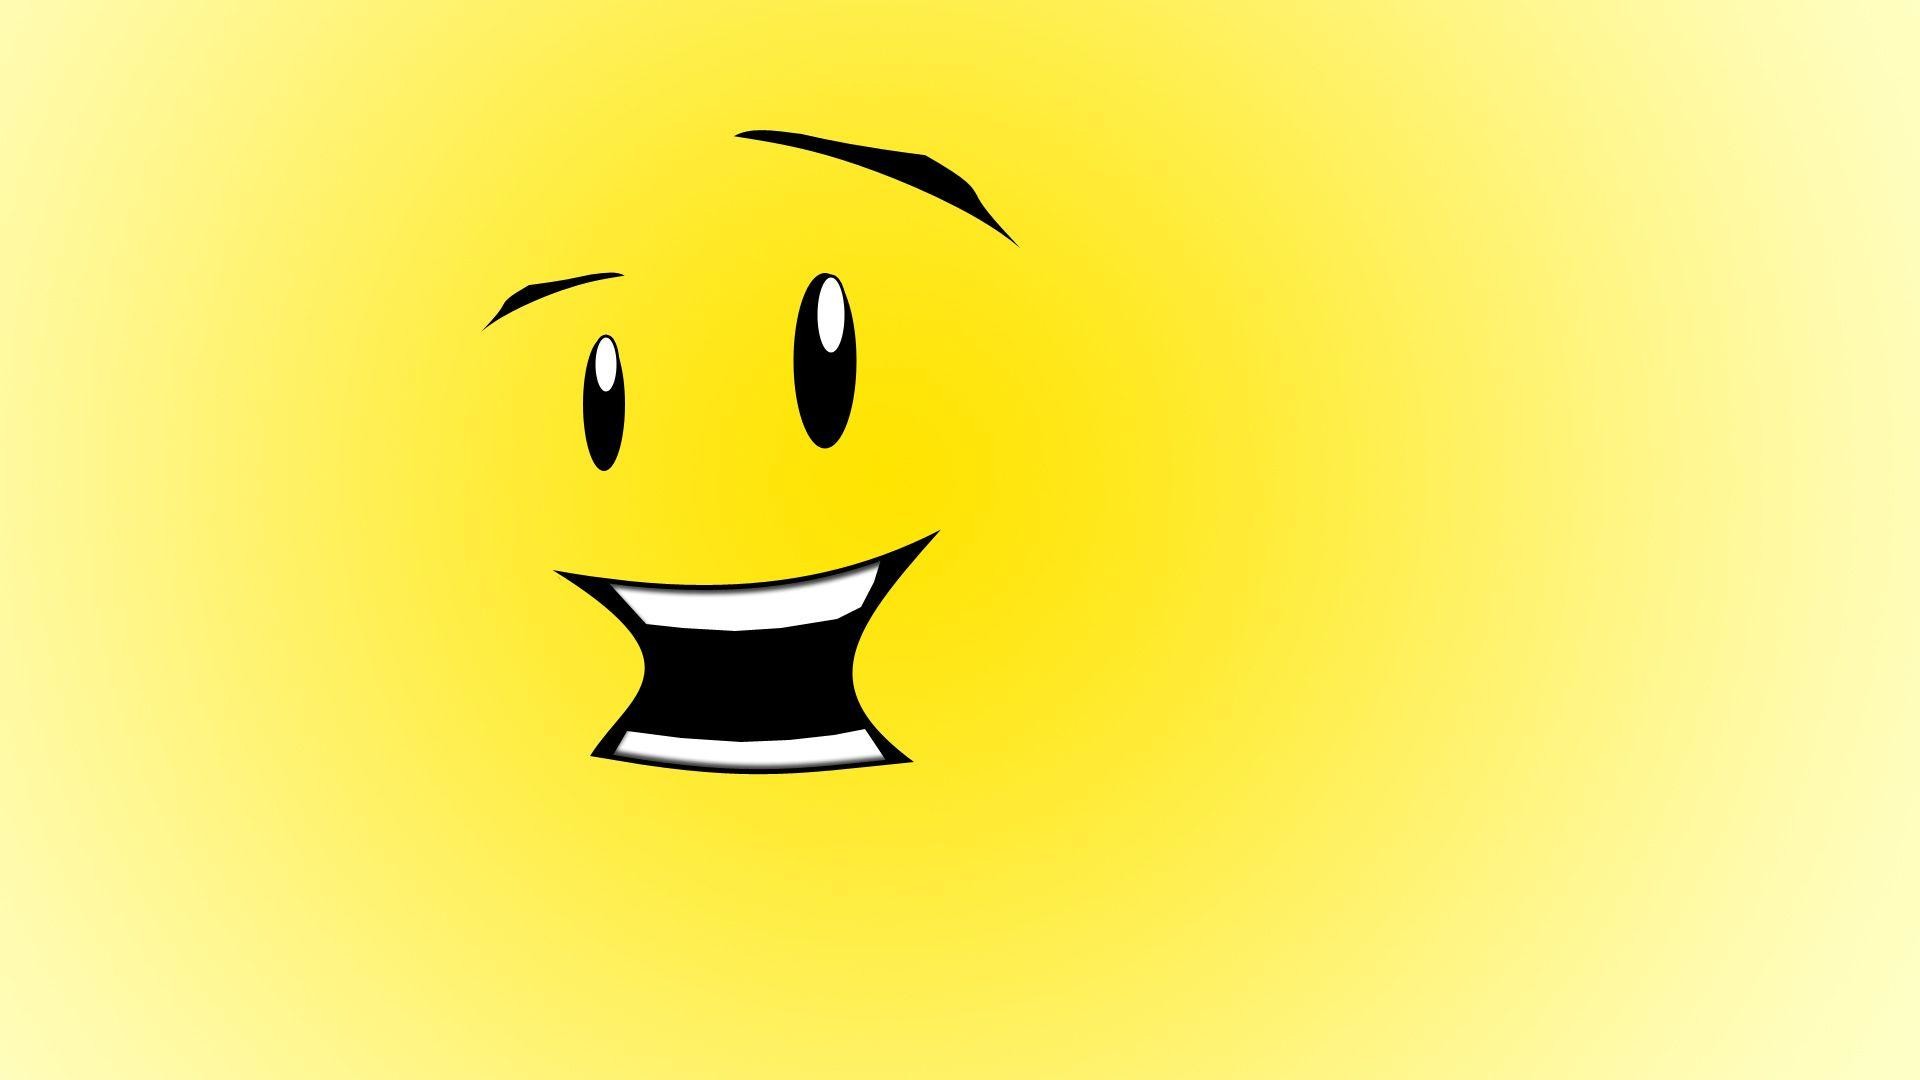 1920x1080 Wallpapers For > Smiley Face Wallpaper